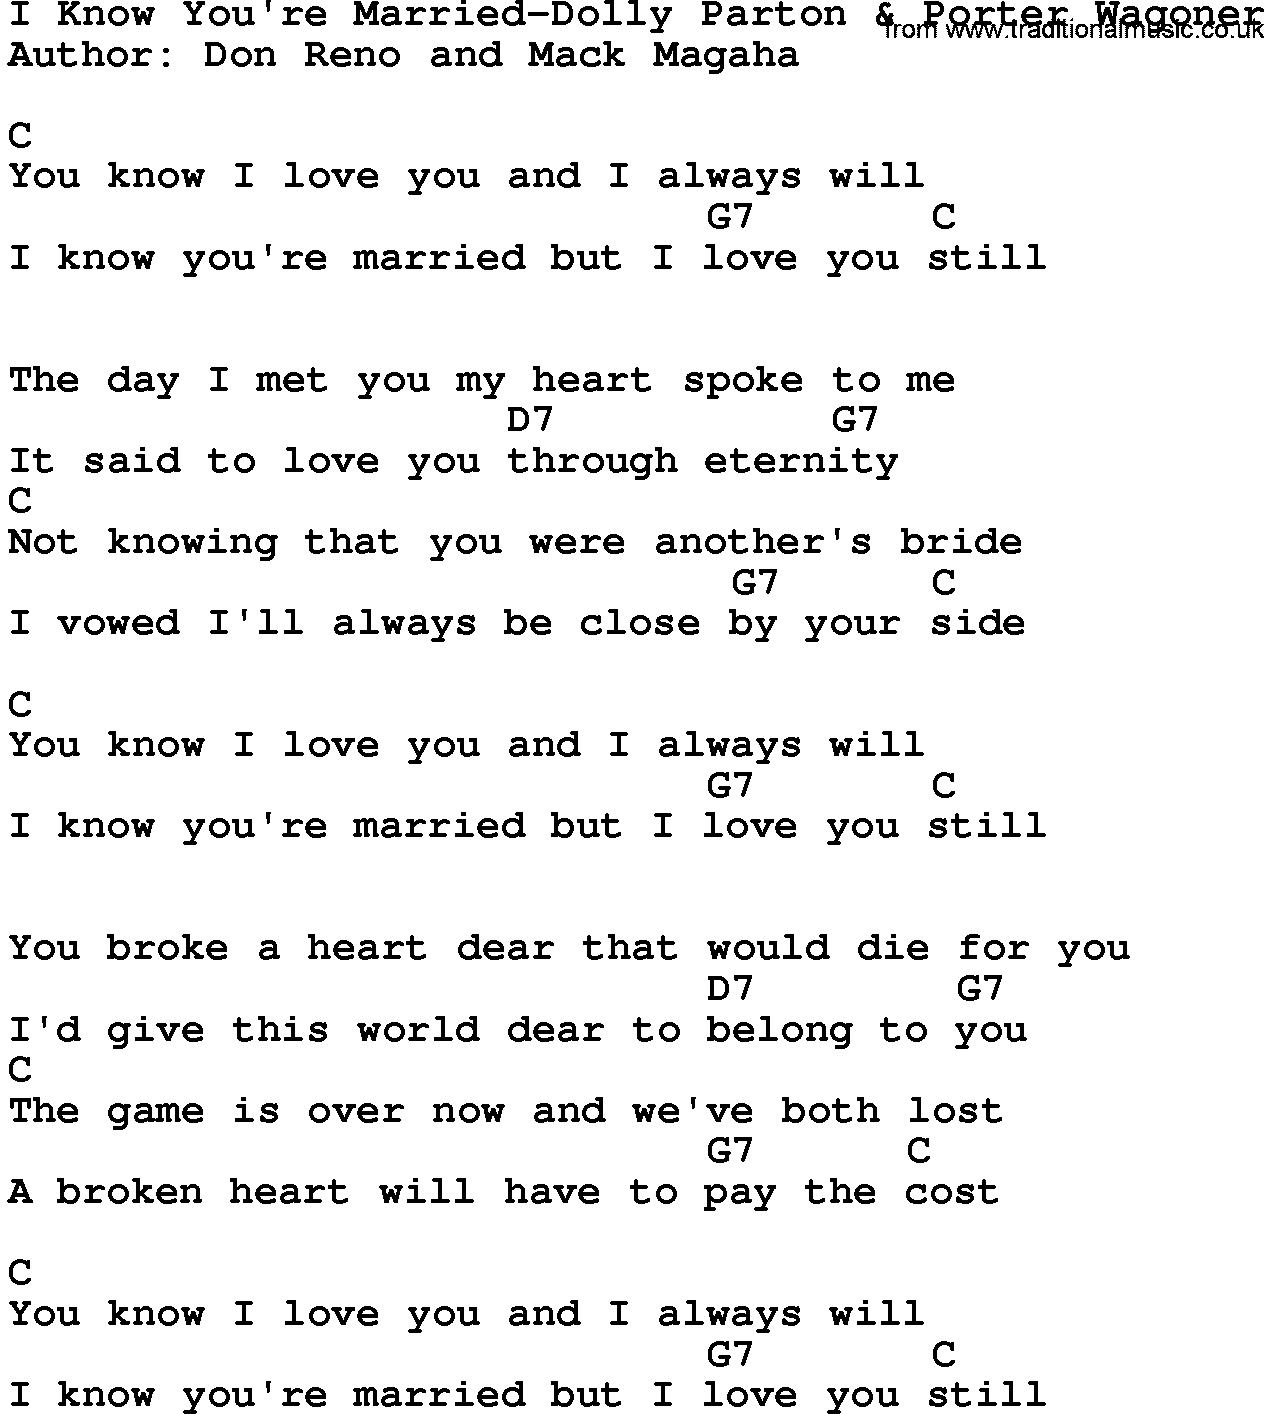 Country music song: I Know You're Married-Dolly Parton & Porter Wagoner lyrics and chords